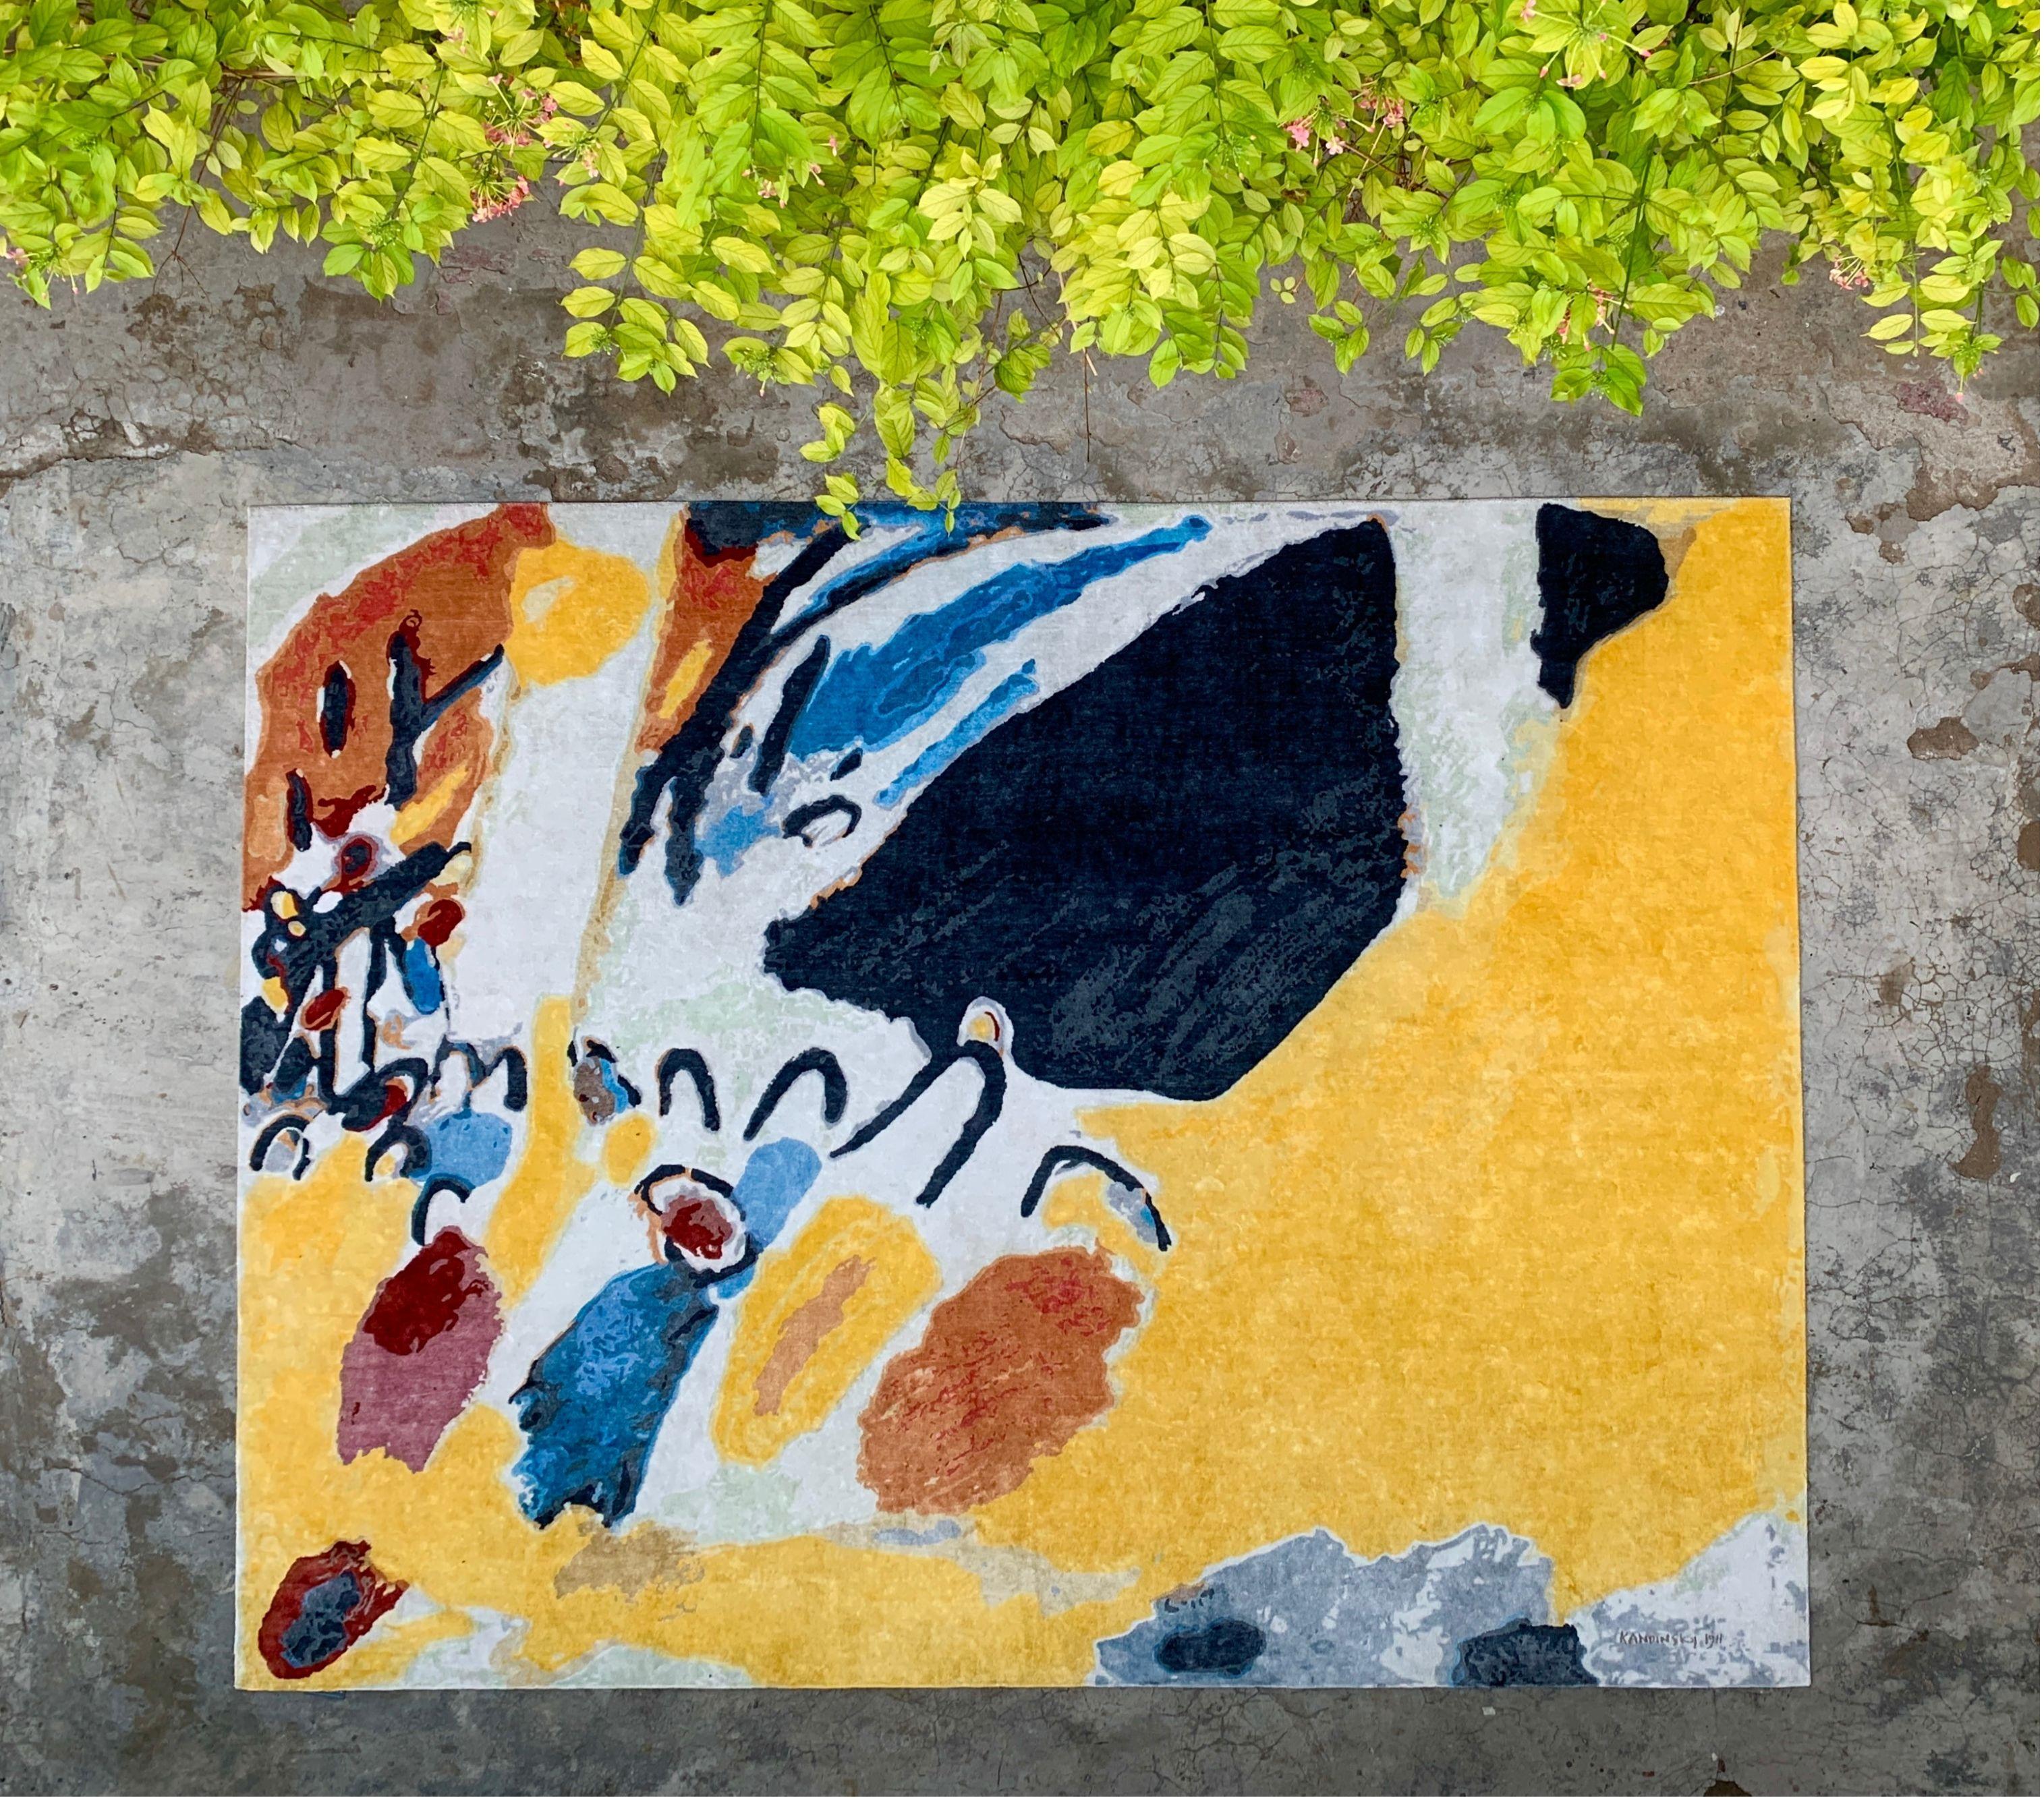 Custom hand knotted rug based on the painting “Impression (Concert)” by Bauhaus master painter Wassily Kandinsky. 
Sustainable and certified fair-trade artisanal production. Label Step fair-trade partners.
Colors: 23 custom-dyed colors. Main colors